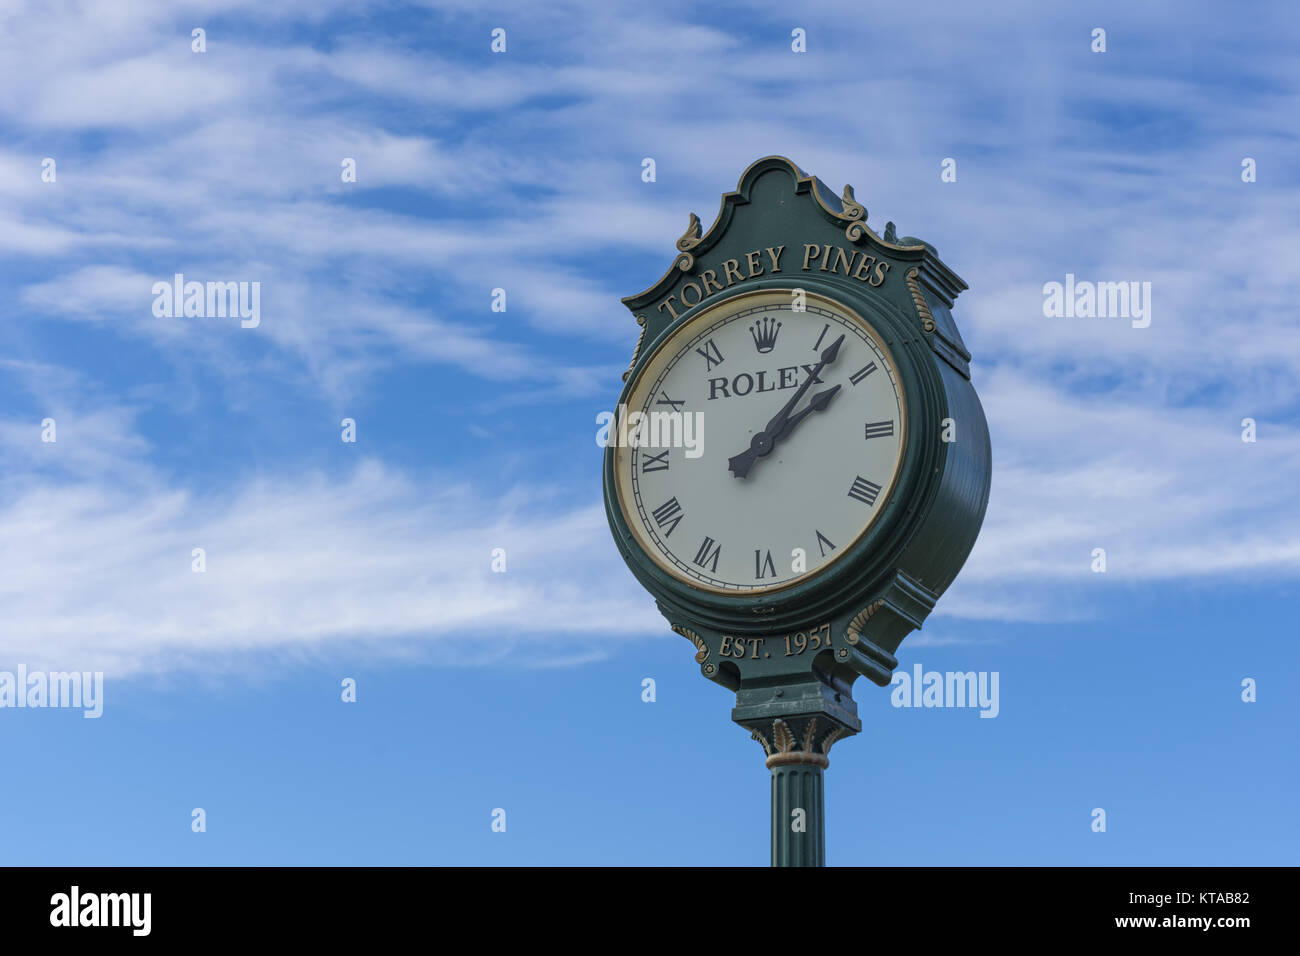 LA JOLLA, CALIFORNIA, USA - NOVEMBER 6, 2017: The famous Rolex clock on the first tee of Torrey Pines golf course near San Diego. Stock Photo